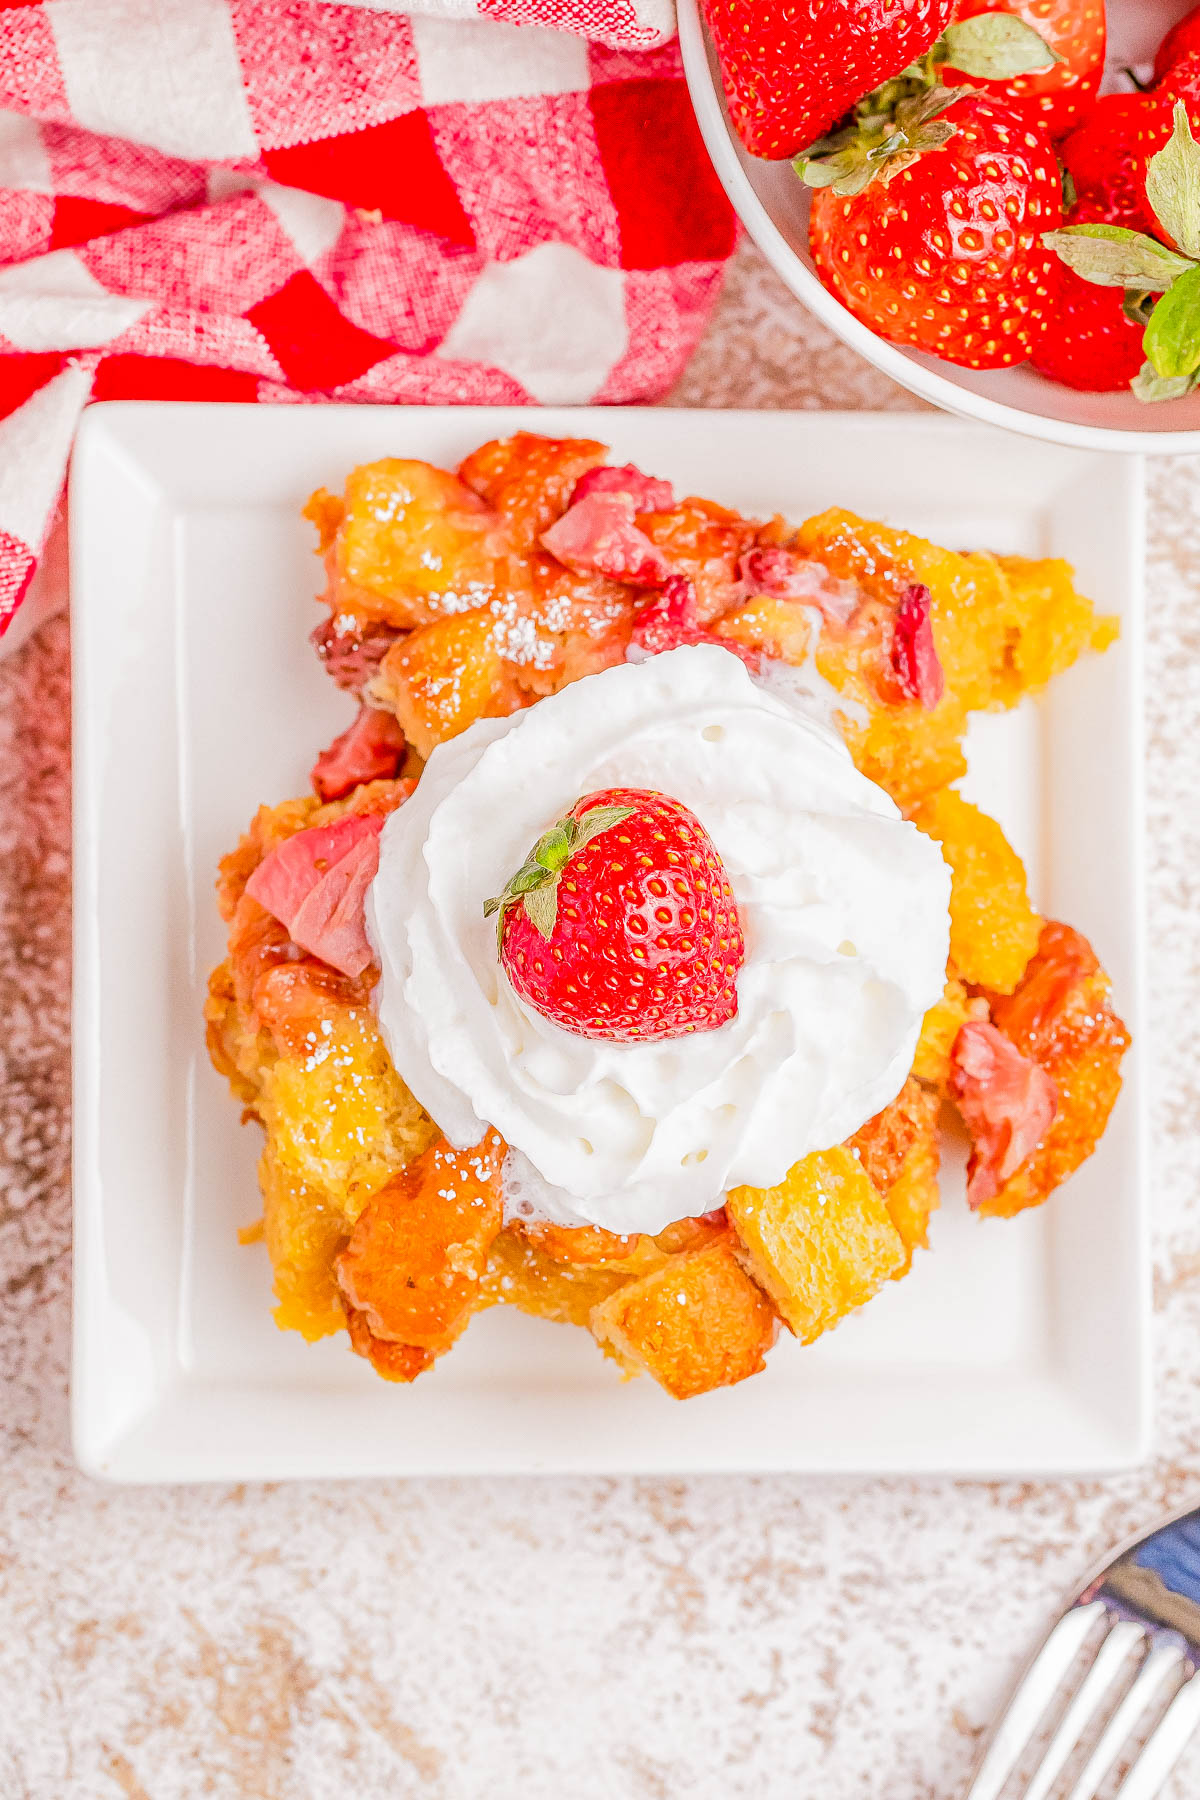 A square plate of strawberry bread pudding topped with whipped cream and a fresh strawberry, with a bowl of strawberries and a red-checkered cloth in the background.